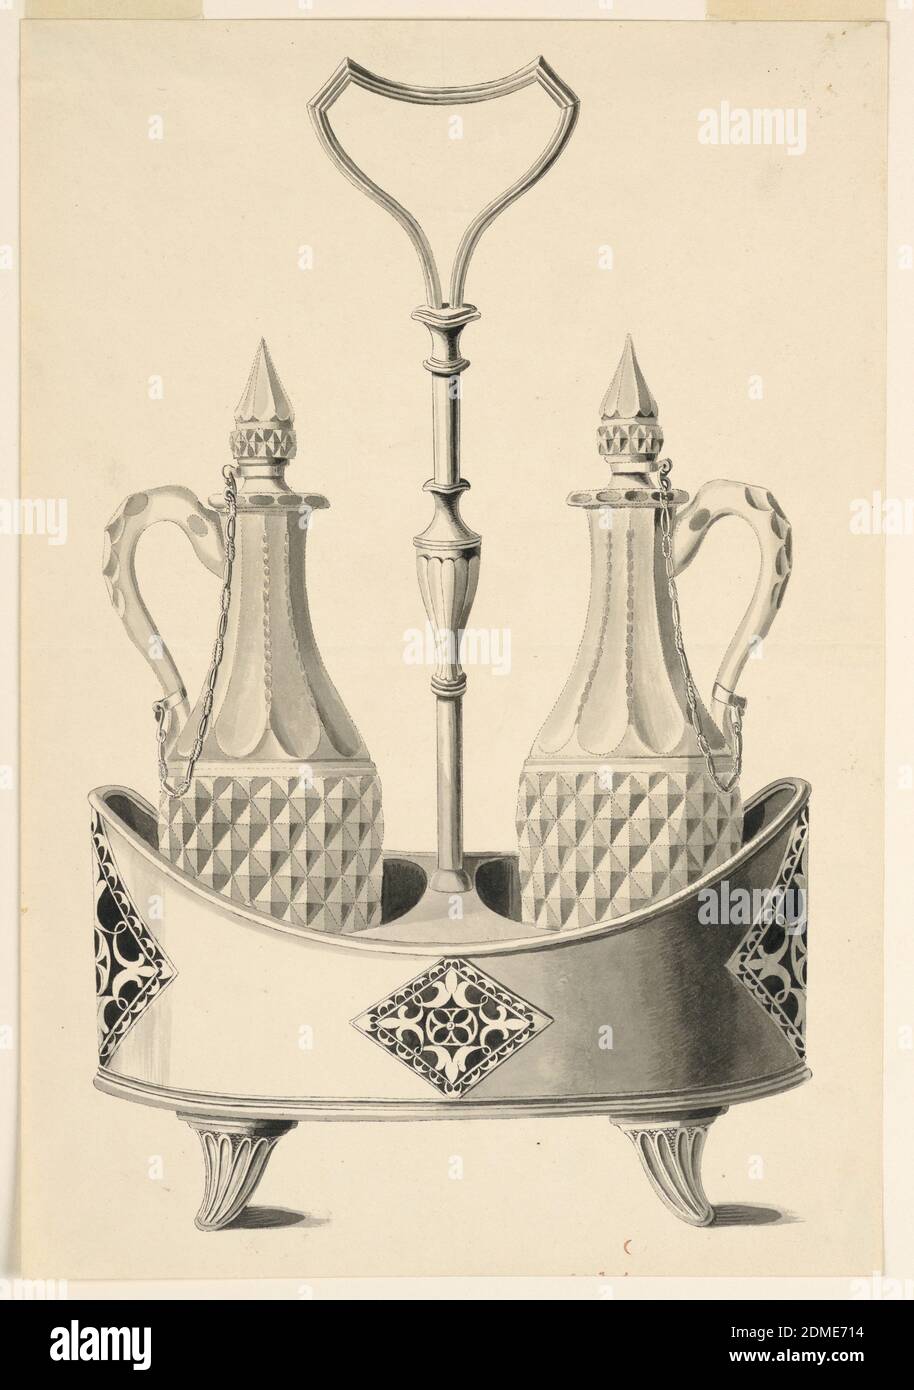 Design for a Cruet Stand, Pen and black ink, brush and wash on paper, Two glass bottles with handles and chained stoppers stand in a tub-shaped stand with fluted feet. The stand is decorated with cut out lozenge ornaments. The handle of the stand in middle with an upside down triangular-shaped handle, and fluted feet. The drawing has been folded., Germany, ca. 1827–35, metalwork, Drawing Stock Photo